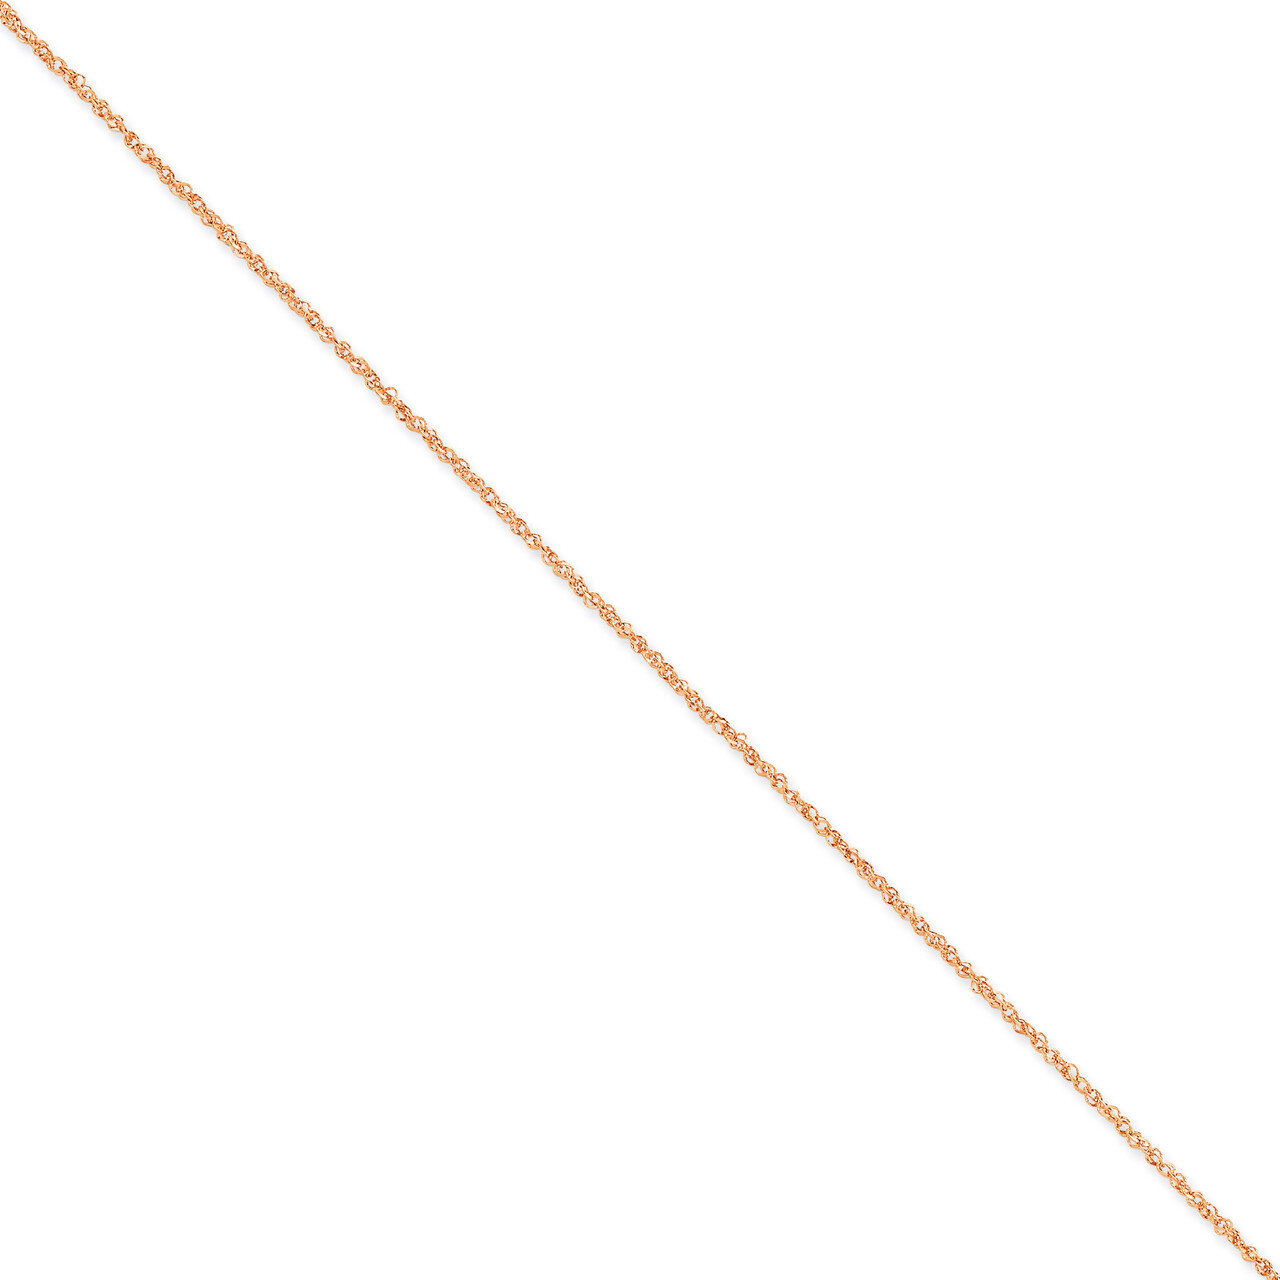 1.7mm Ropa Chain Anklet 9 Inch 14k Rose Gold RSC28-9